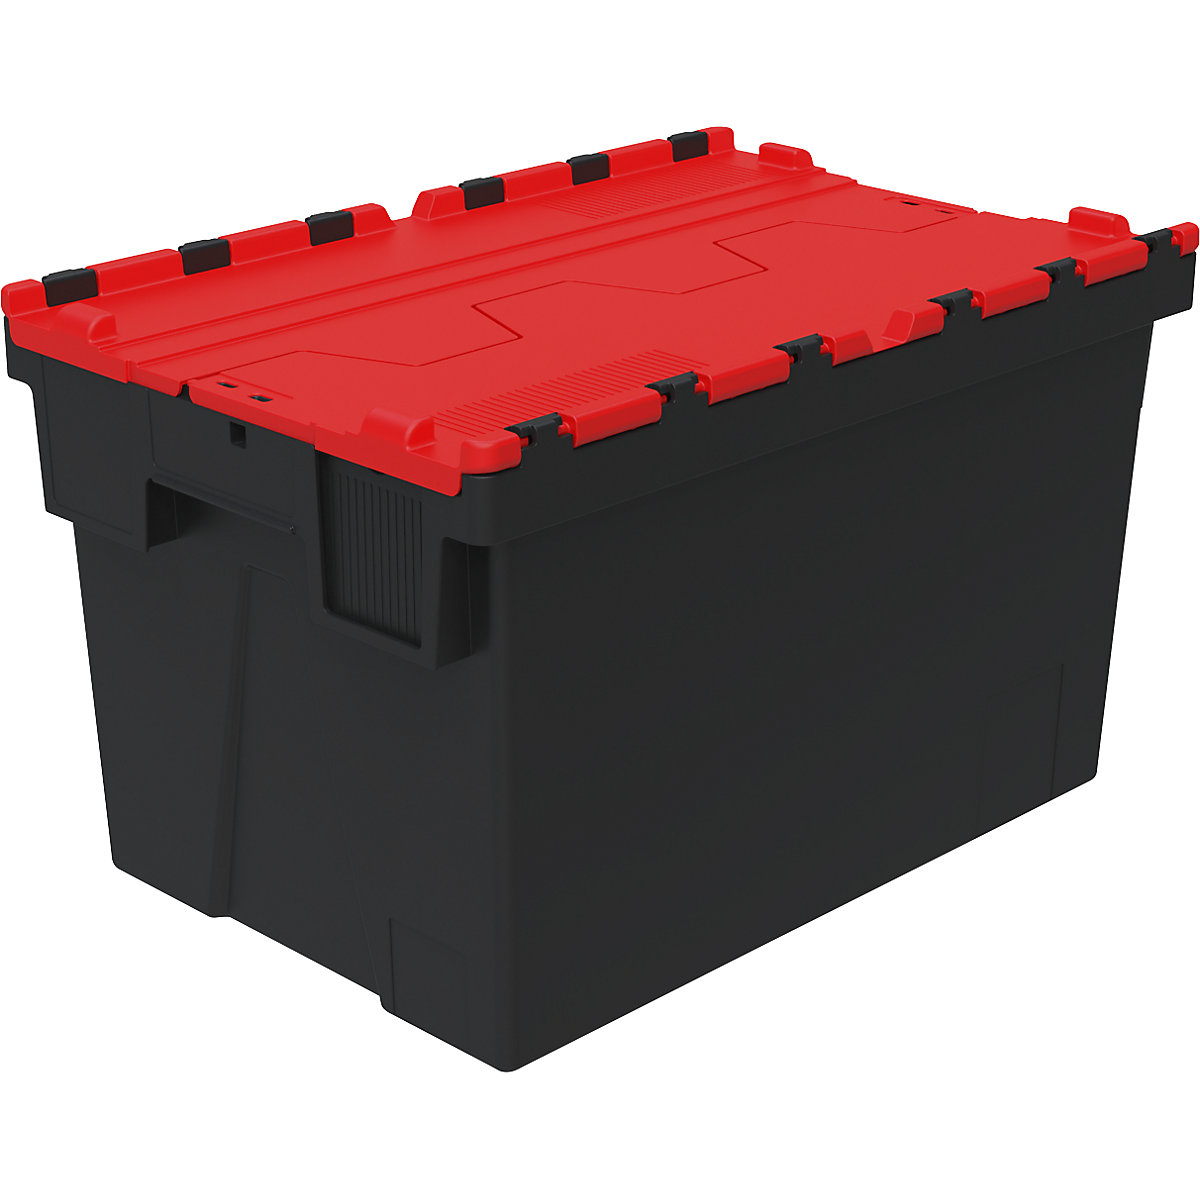 Reusable stacking container, LxWxH 600 x 400 x 367 mm, black/red-4